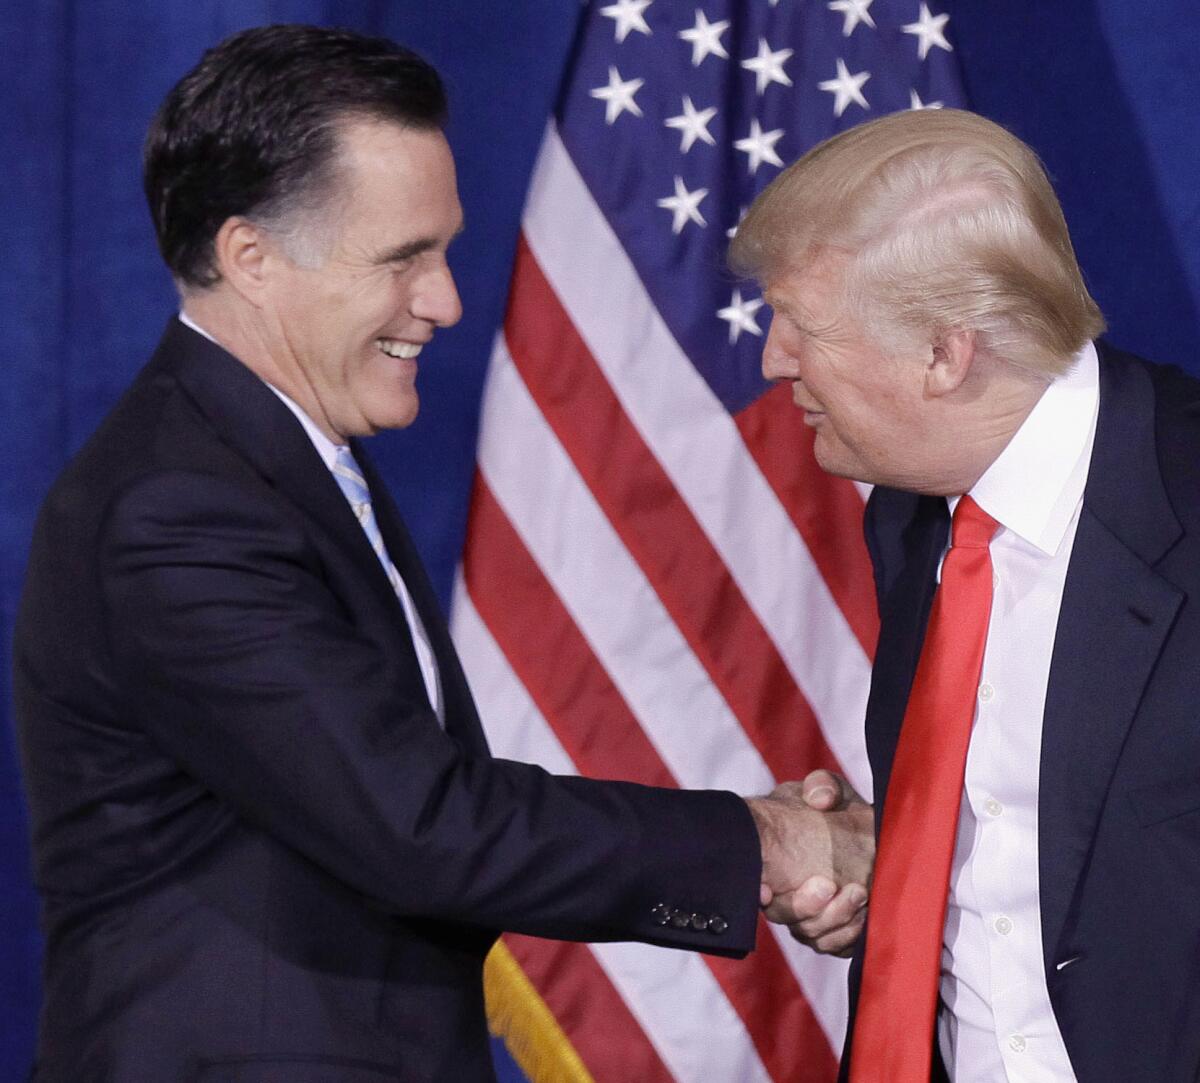 Donald Trump greets then-Republican presidential candidate Mitt Romney, left, at a 2012 news conference in Las Vegas during which he endorsed the former Massachusetts governor.